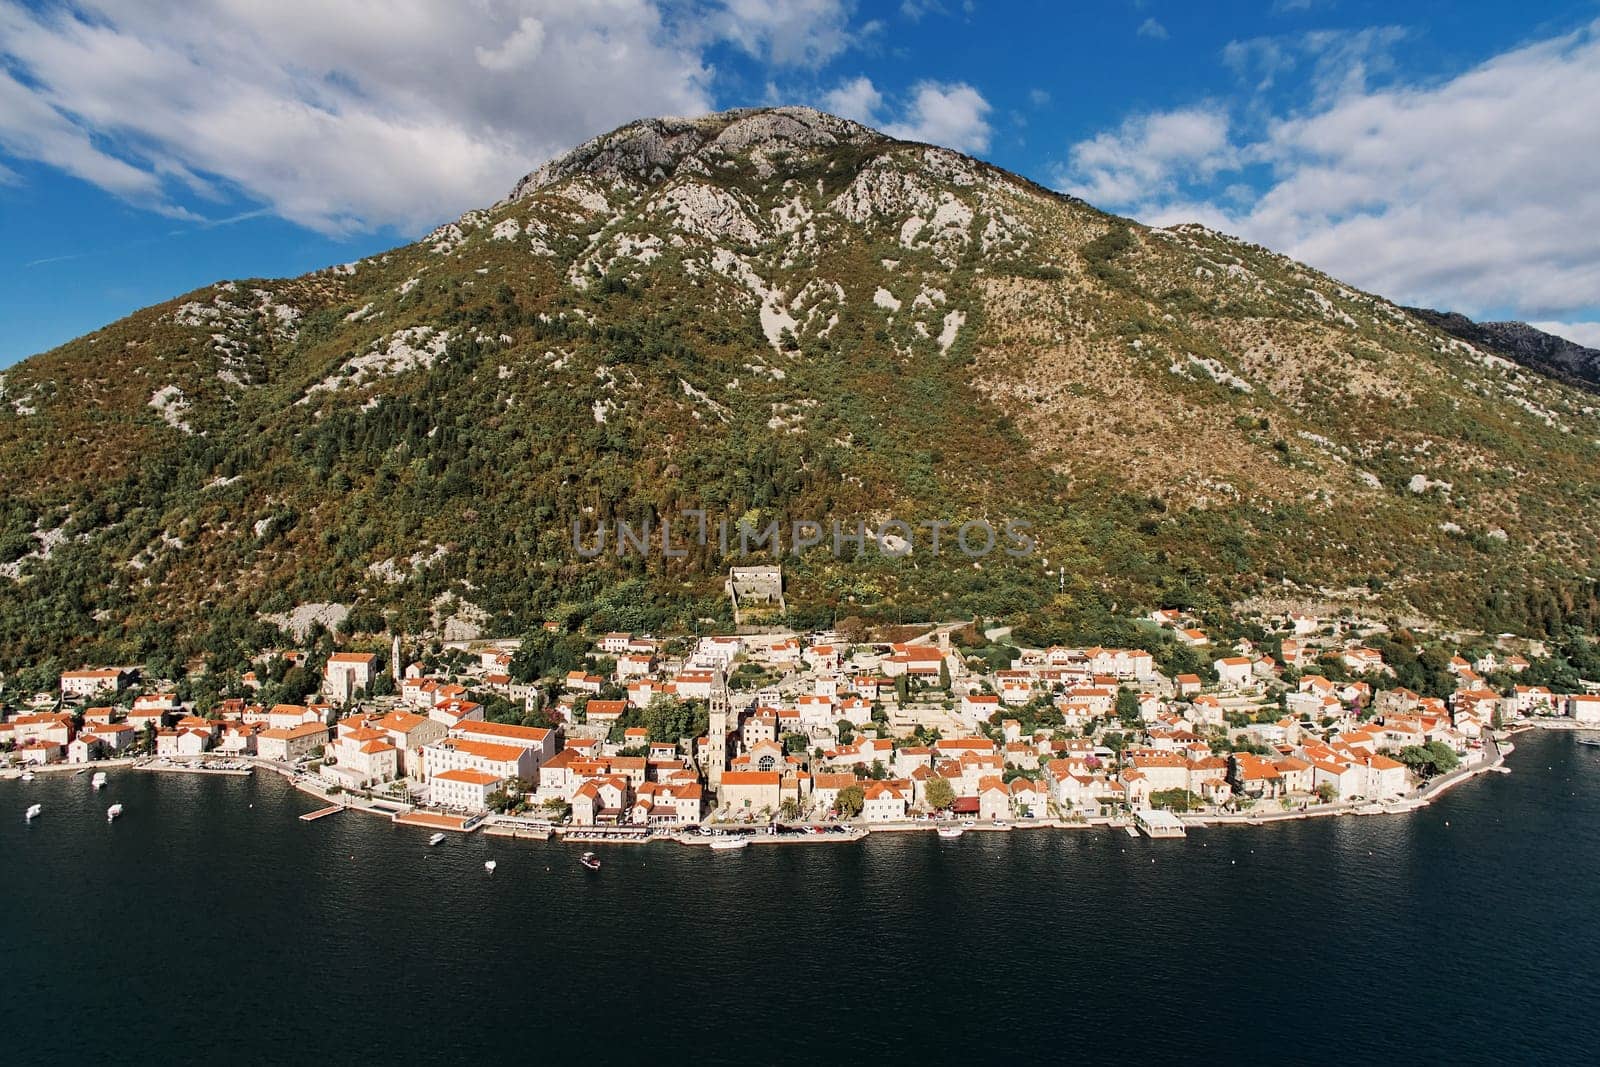 Winding coastline of Perast with the bell tower of the church at the foot of the mountain. Montenegro. Drone by Nadtochiy